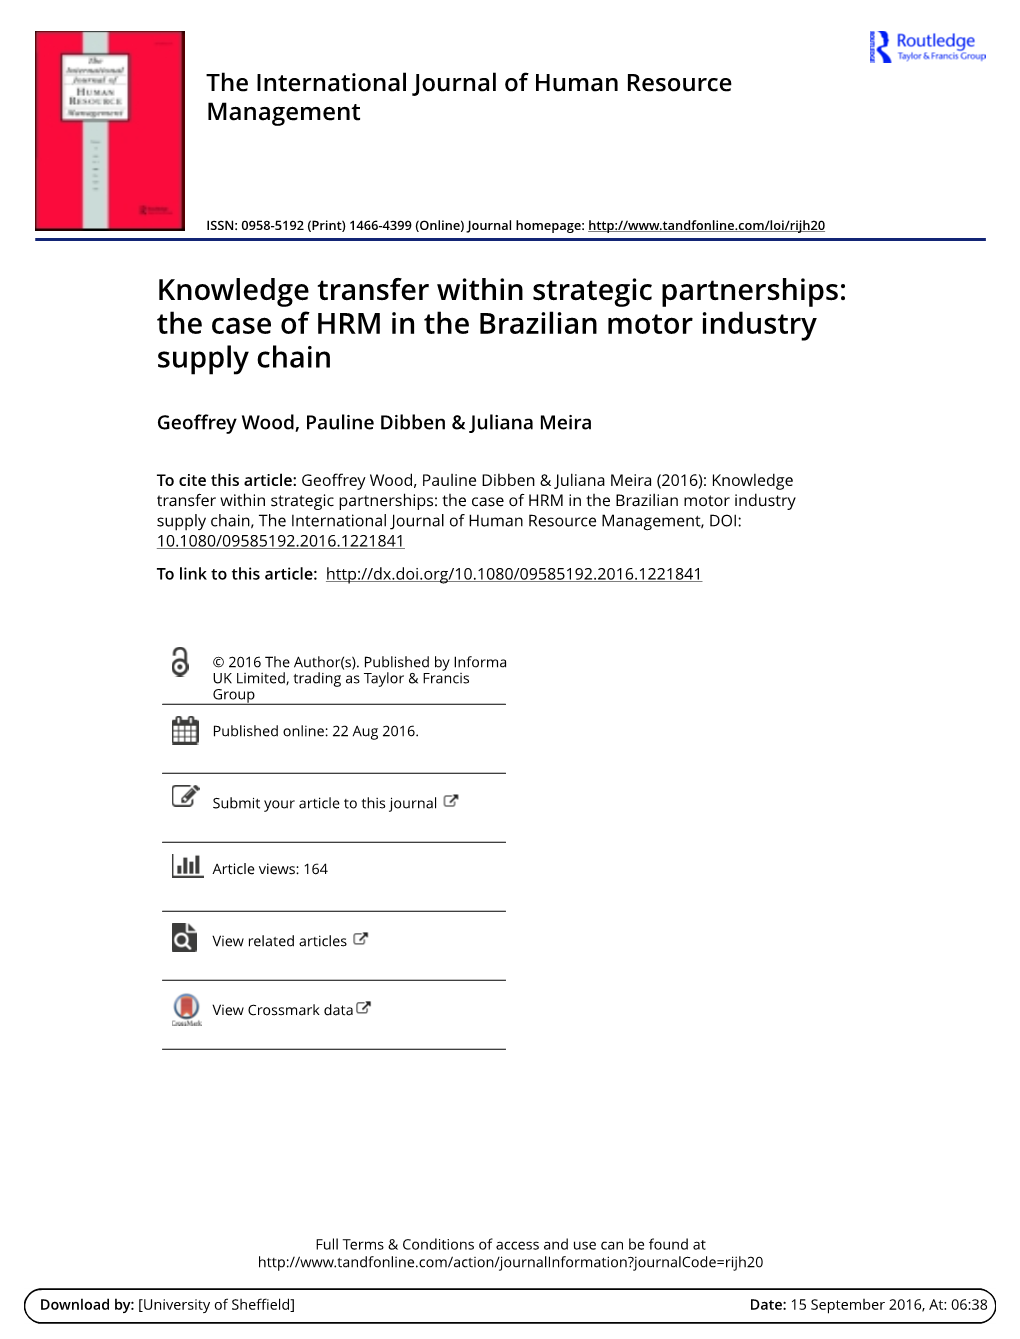 Knowledge Transfer Within Strategic Partnerships: the Case of HRM in the Brazilian Motor Industry Supply Chain